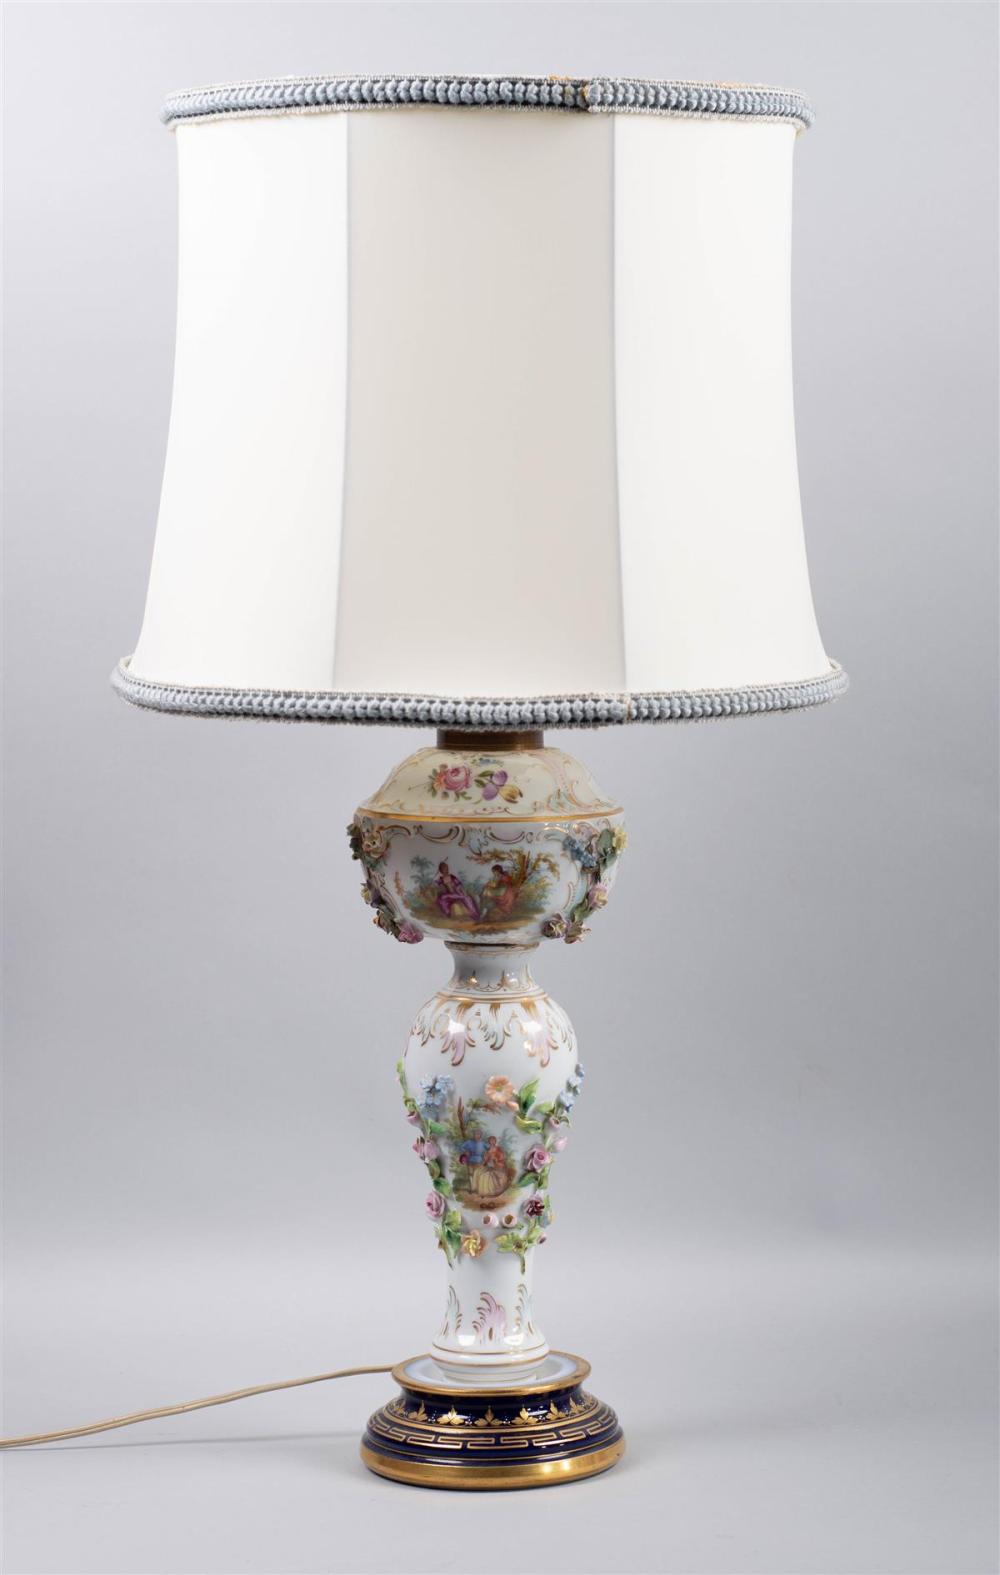 CONTINENTAL PORCELAIN TABLE LAMPCONTINENTAL 33b0ed